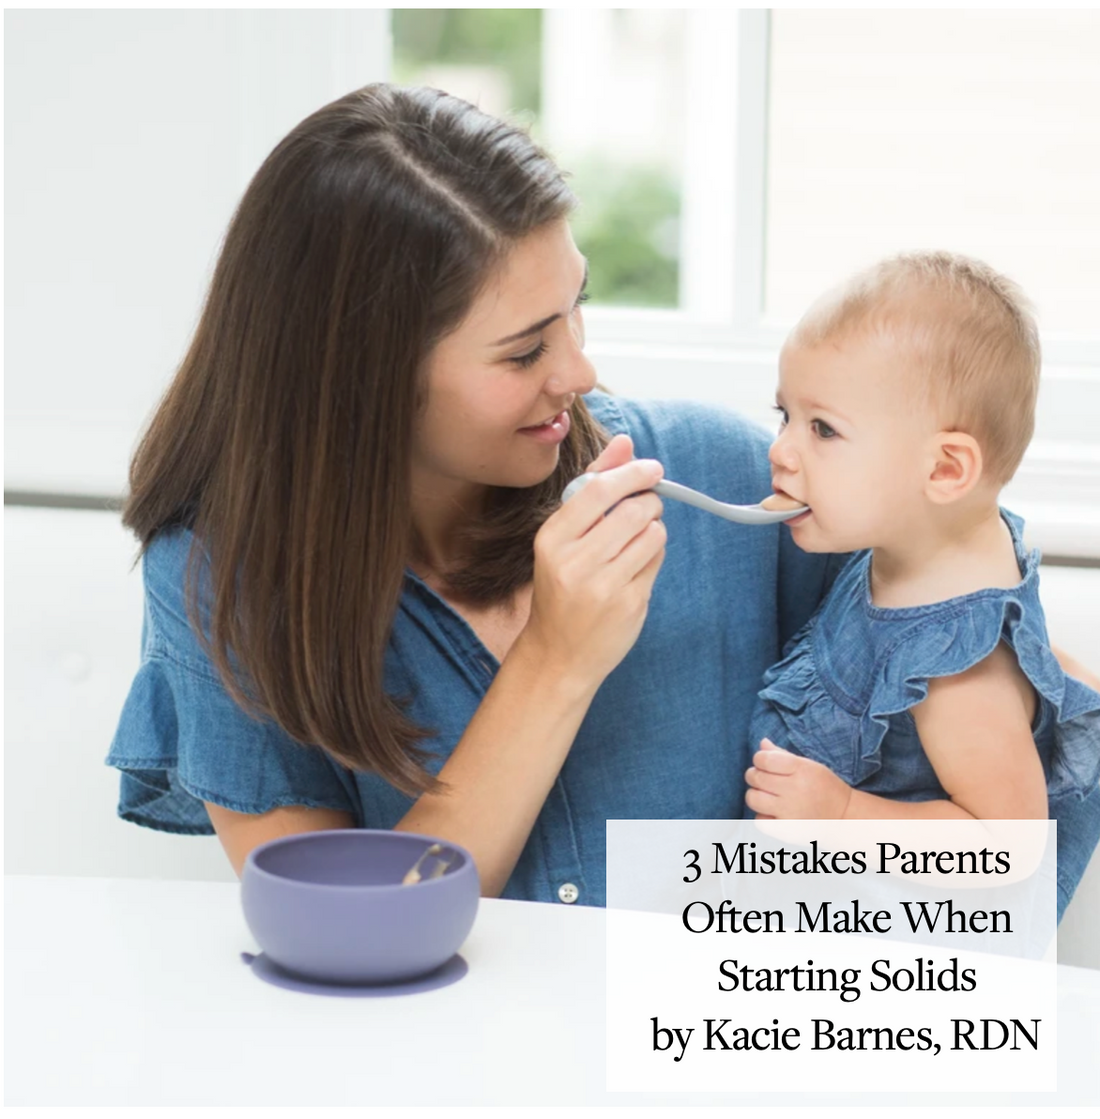 3 Mistakes Parents Often Make When Starting Solids